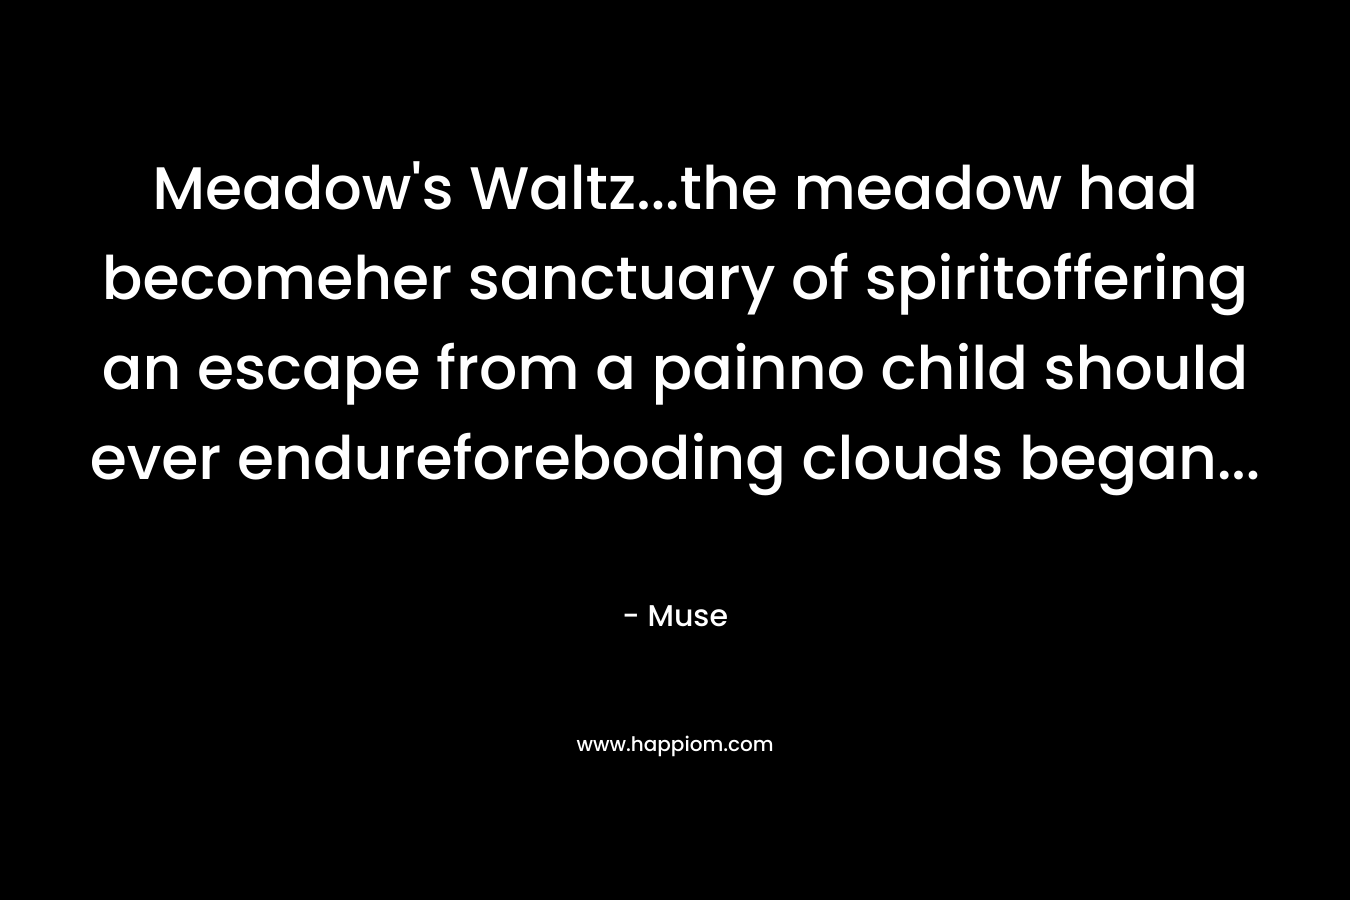 Meadow’s Waltz…the meadow had becomeher sanctuary of spiritoffering an escape from a painno child should ever endureforeboding clouds began… – Muse